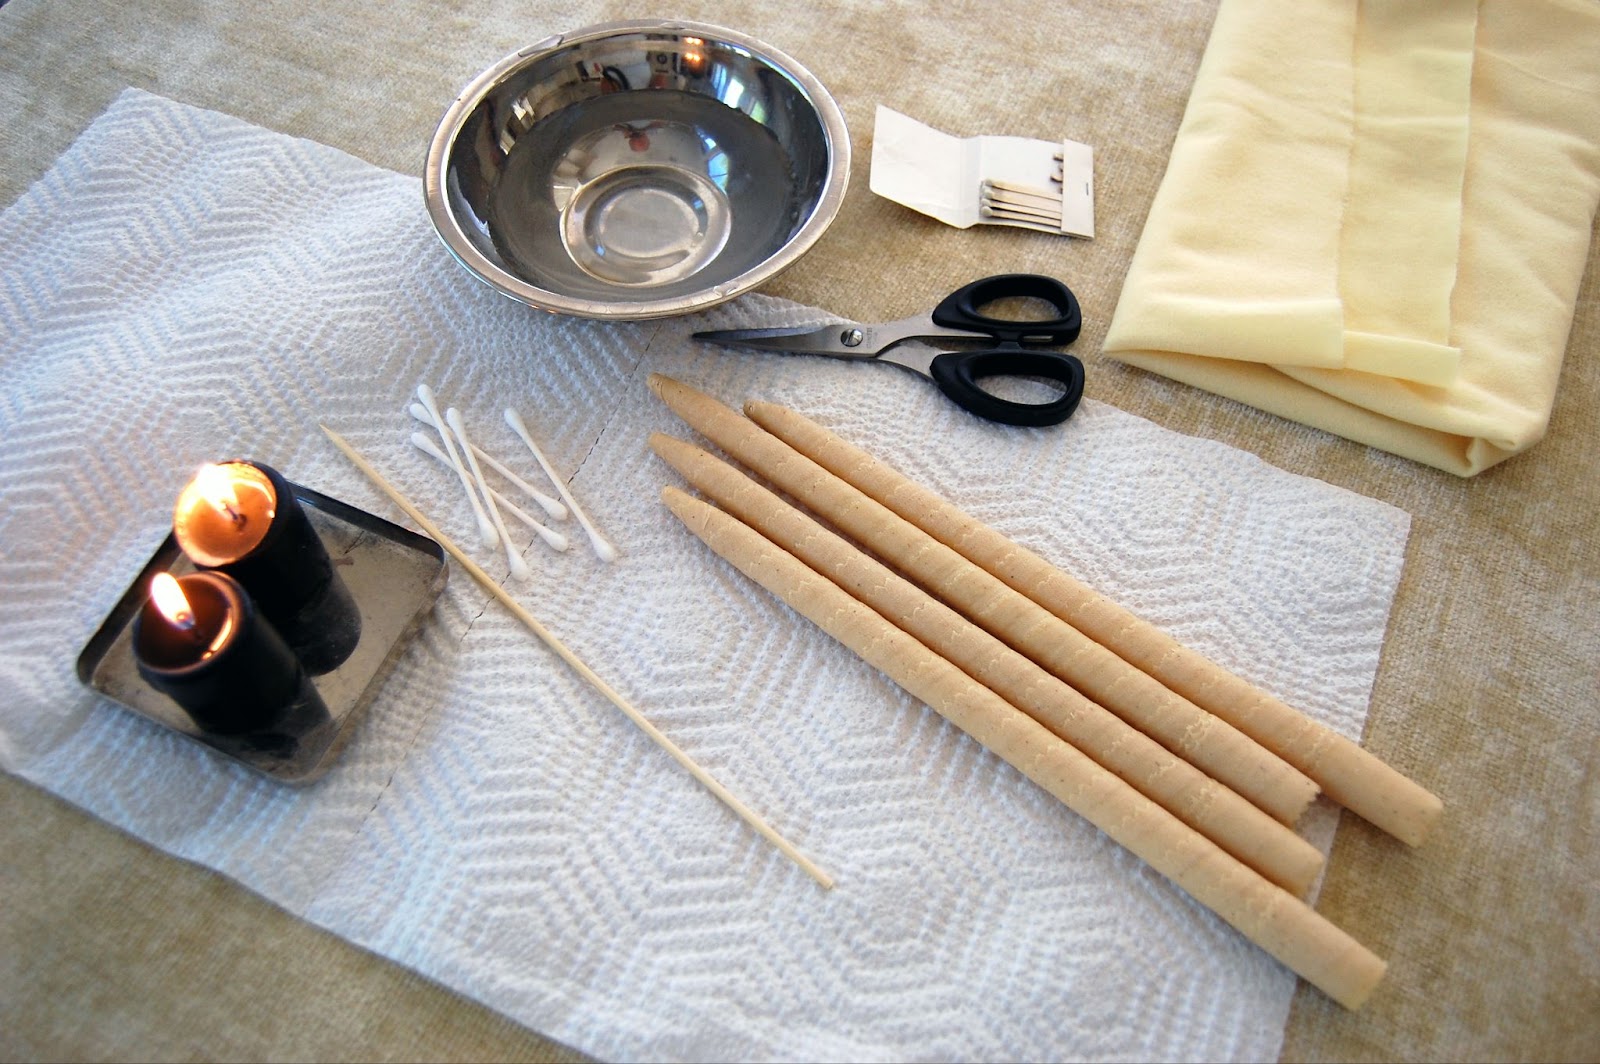 A selection of hopi ear candling tools including candles, scissors, ear buds, and matches.